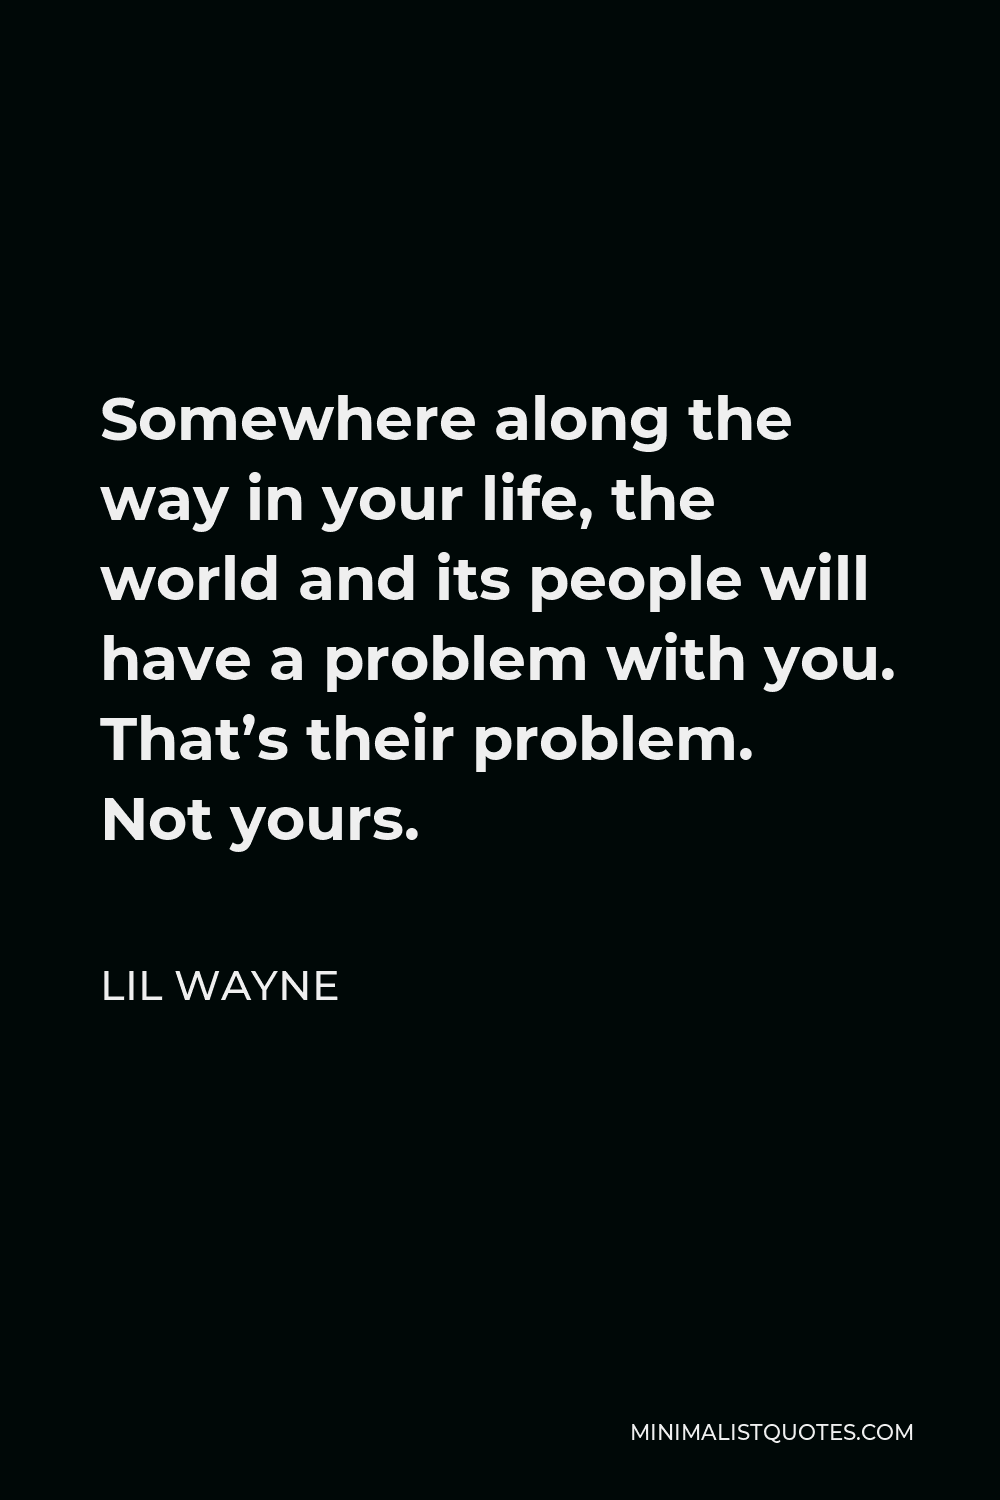 Lil Wayne Quote - Somewhere along the way in your life, the world and its people will have a problem with you. That’s their problem. Not yours.